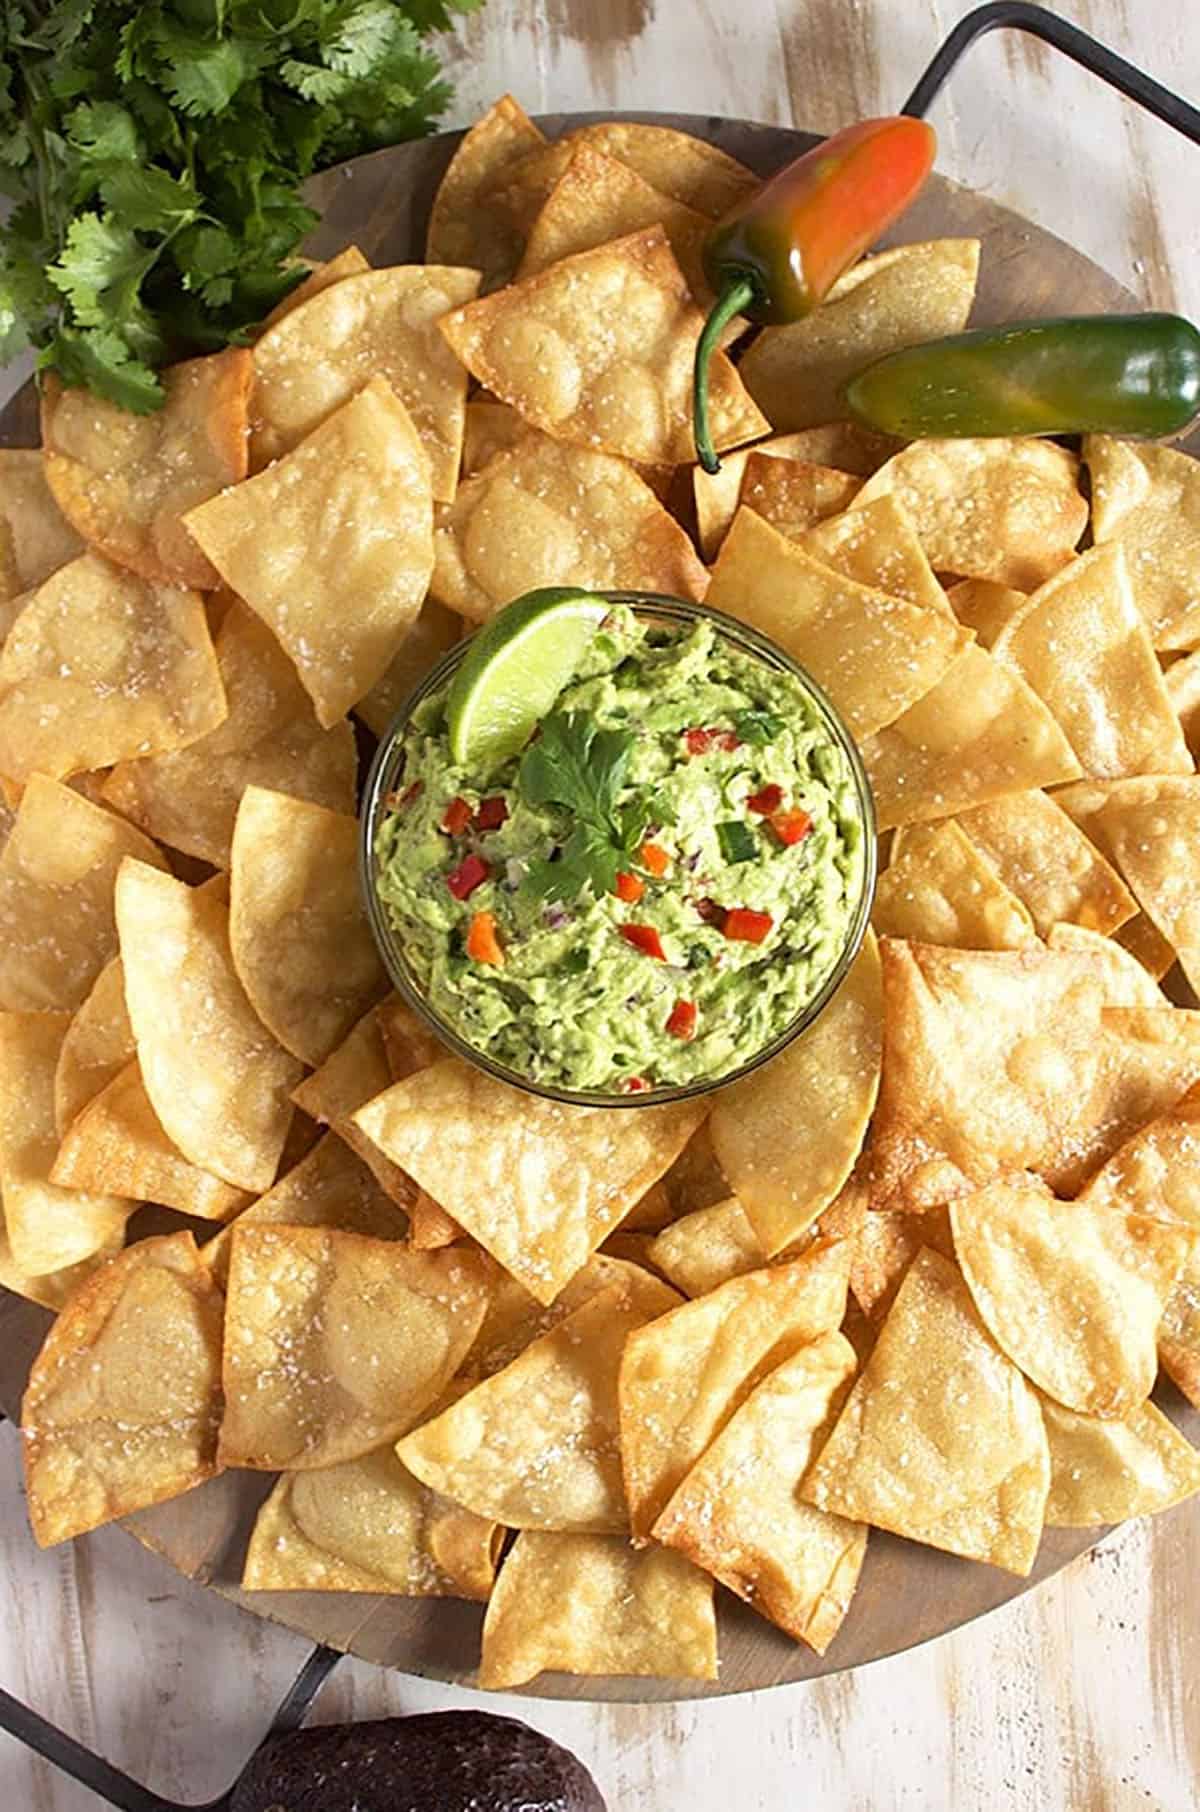 Guacamole bowl in the middle of a large tray filled with crispy tortilla chips.